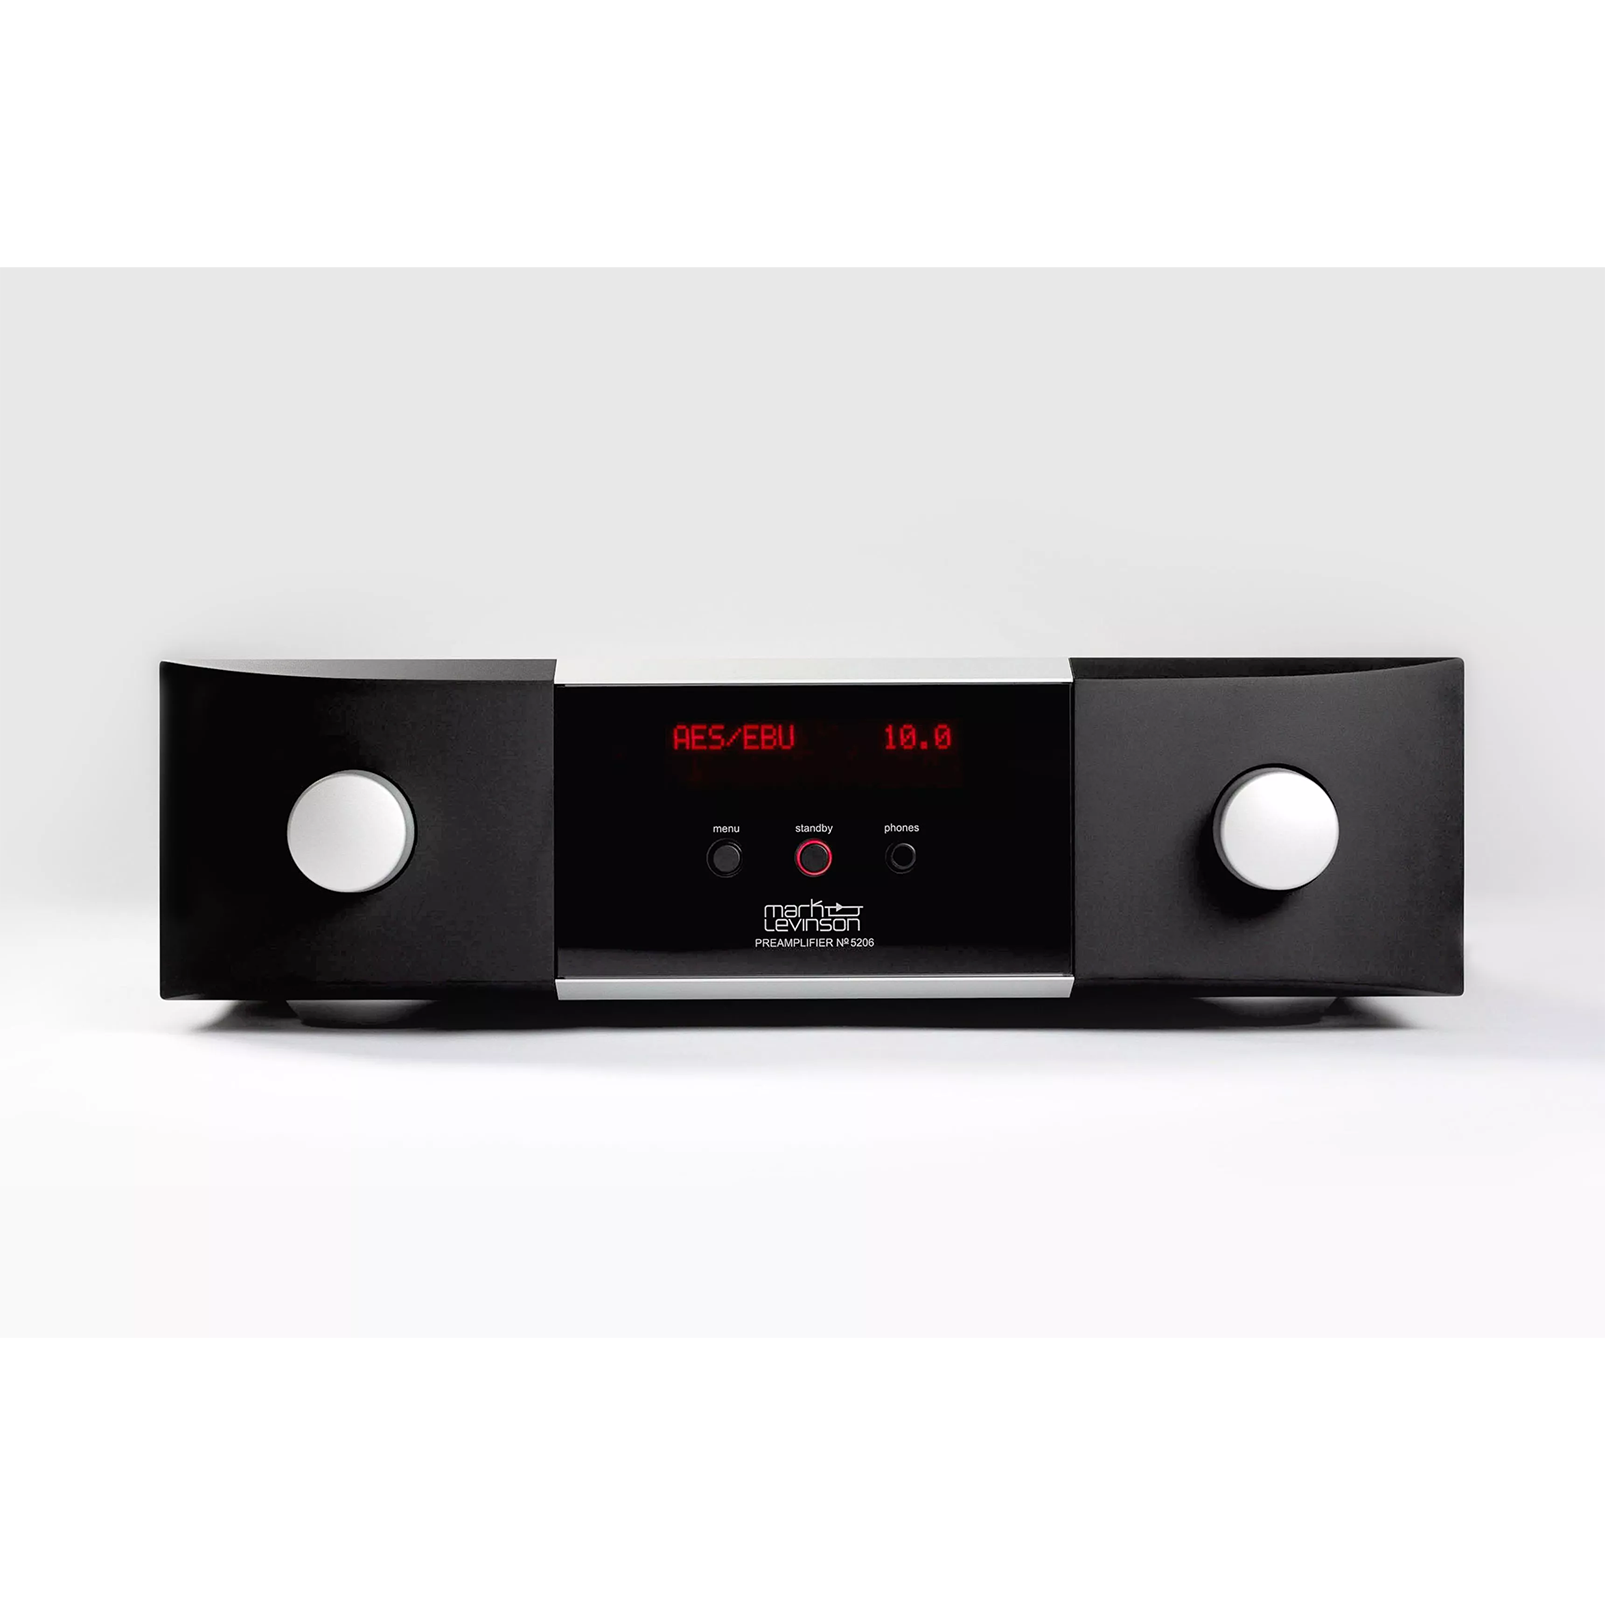 №5206 - Black - Mark Levinson № 5206 preamplifier with Pure Path fully discrete, direct-coupled, dual-monaural line-level class A preamp circuitry, MM/MC phono stage, and Main Drive headphone output. - Front